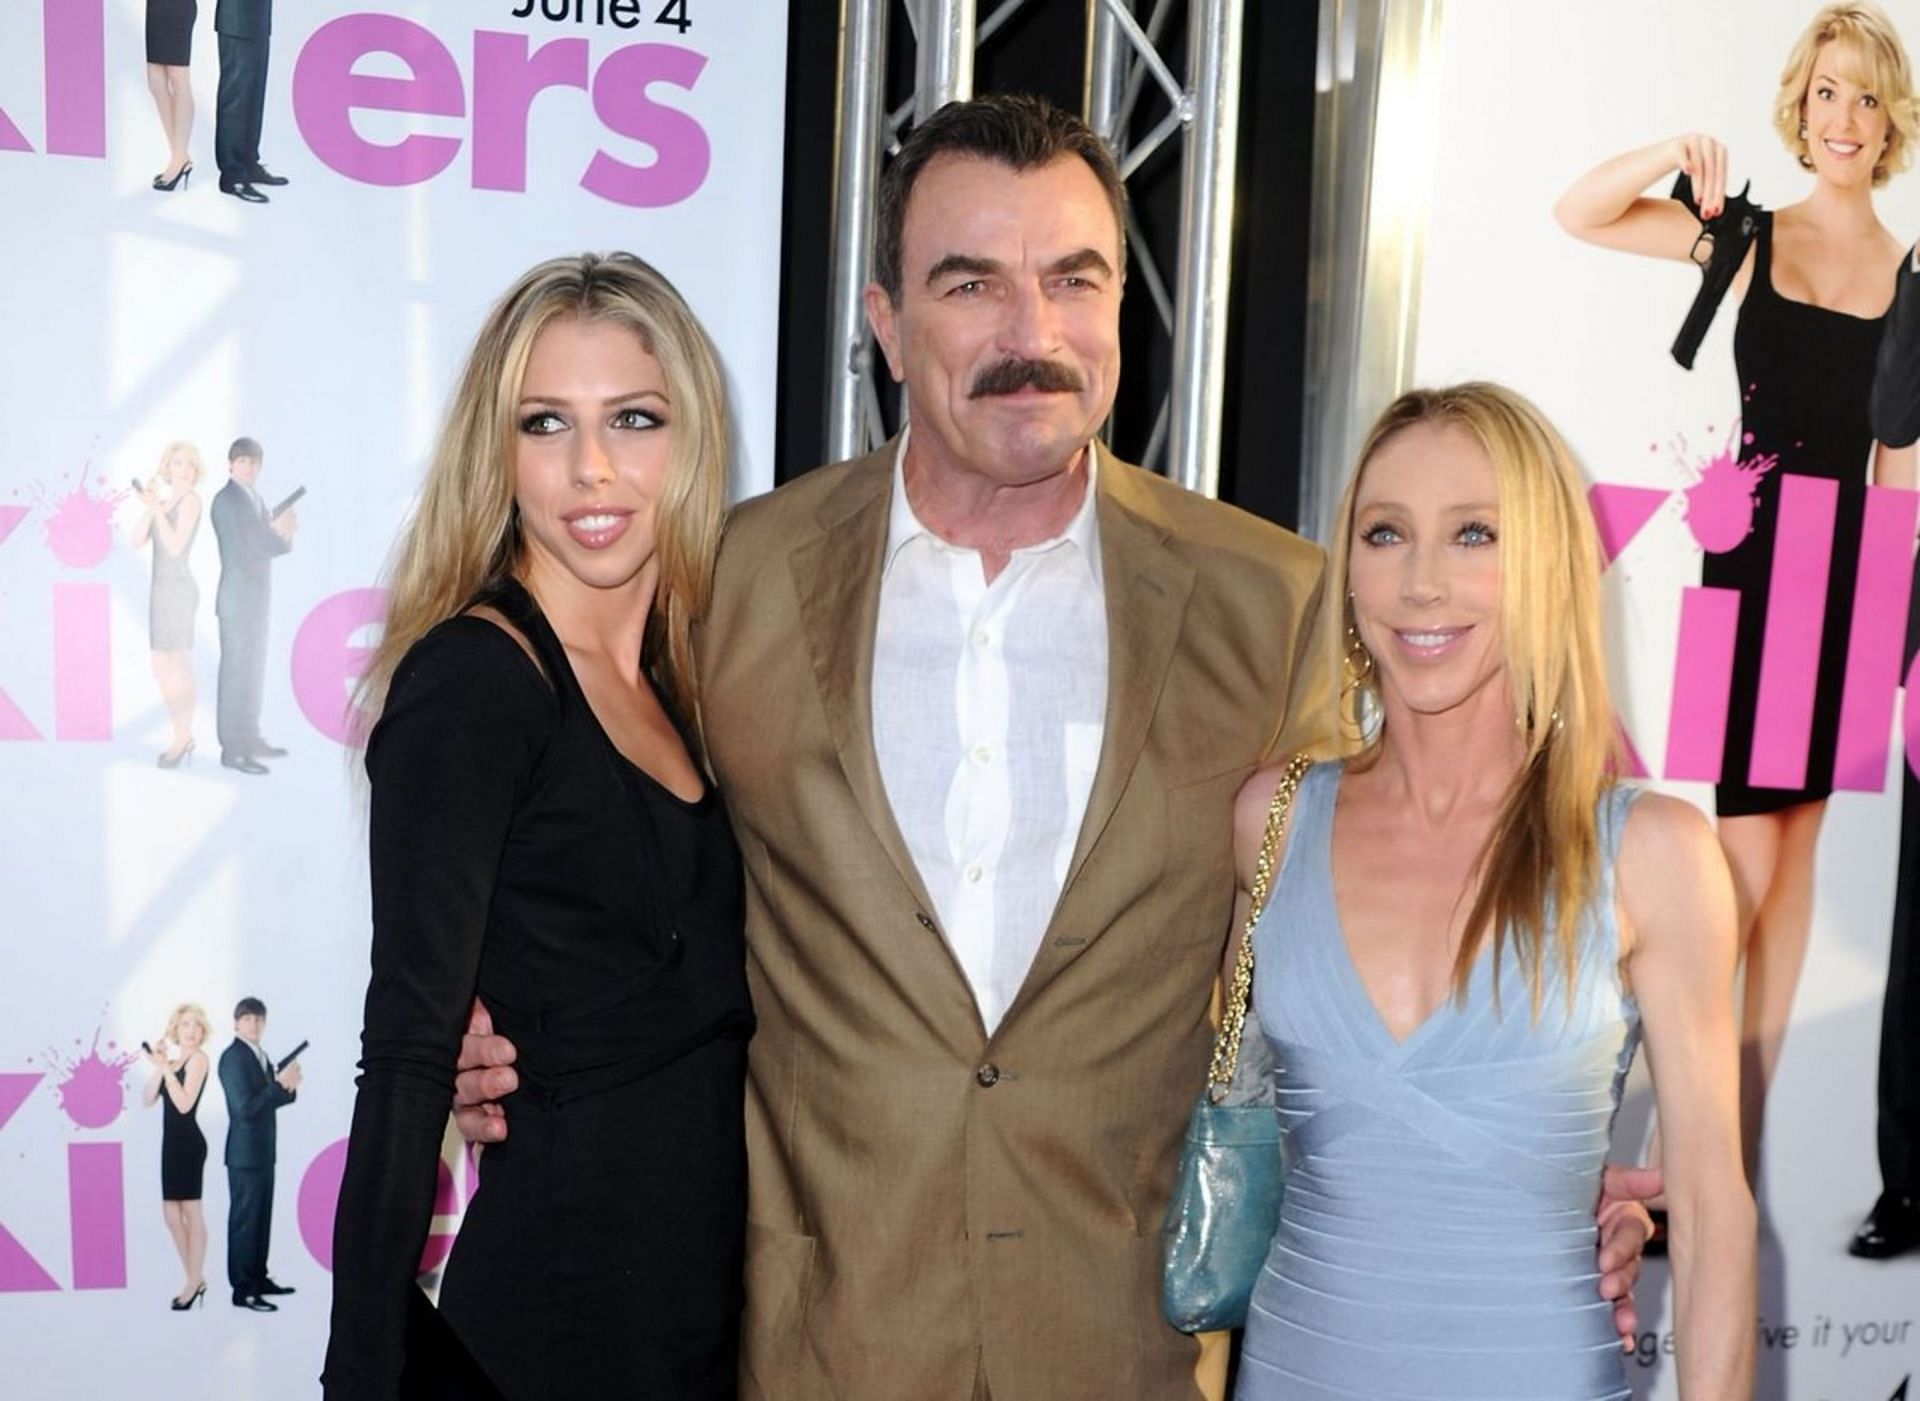 Tom Selleck with wife and daughter (Image via Frazer Harrison/Getty Images)